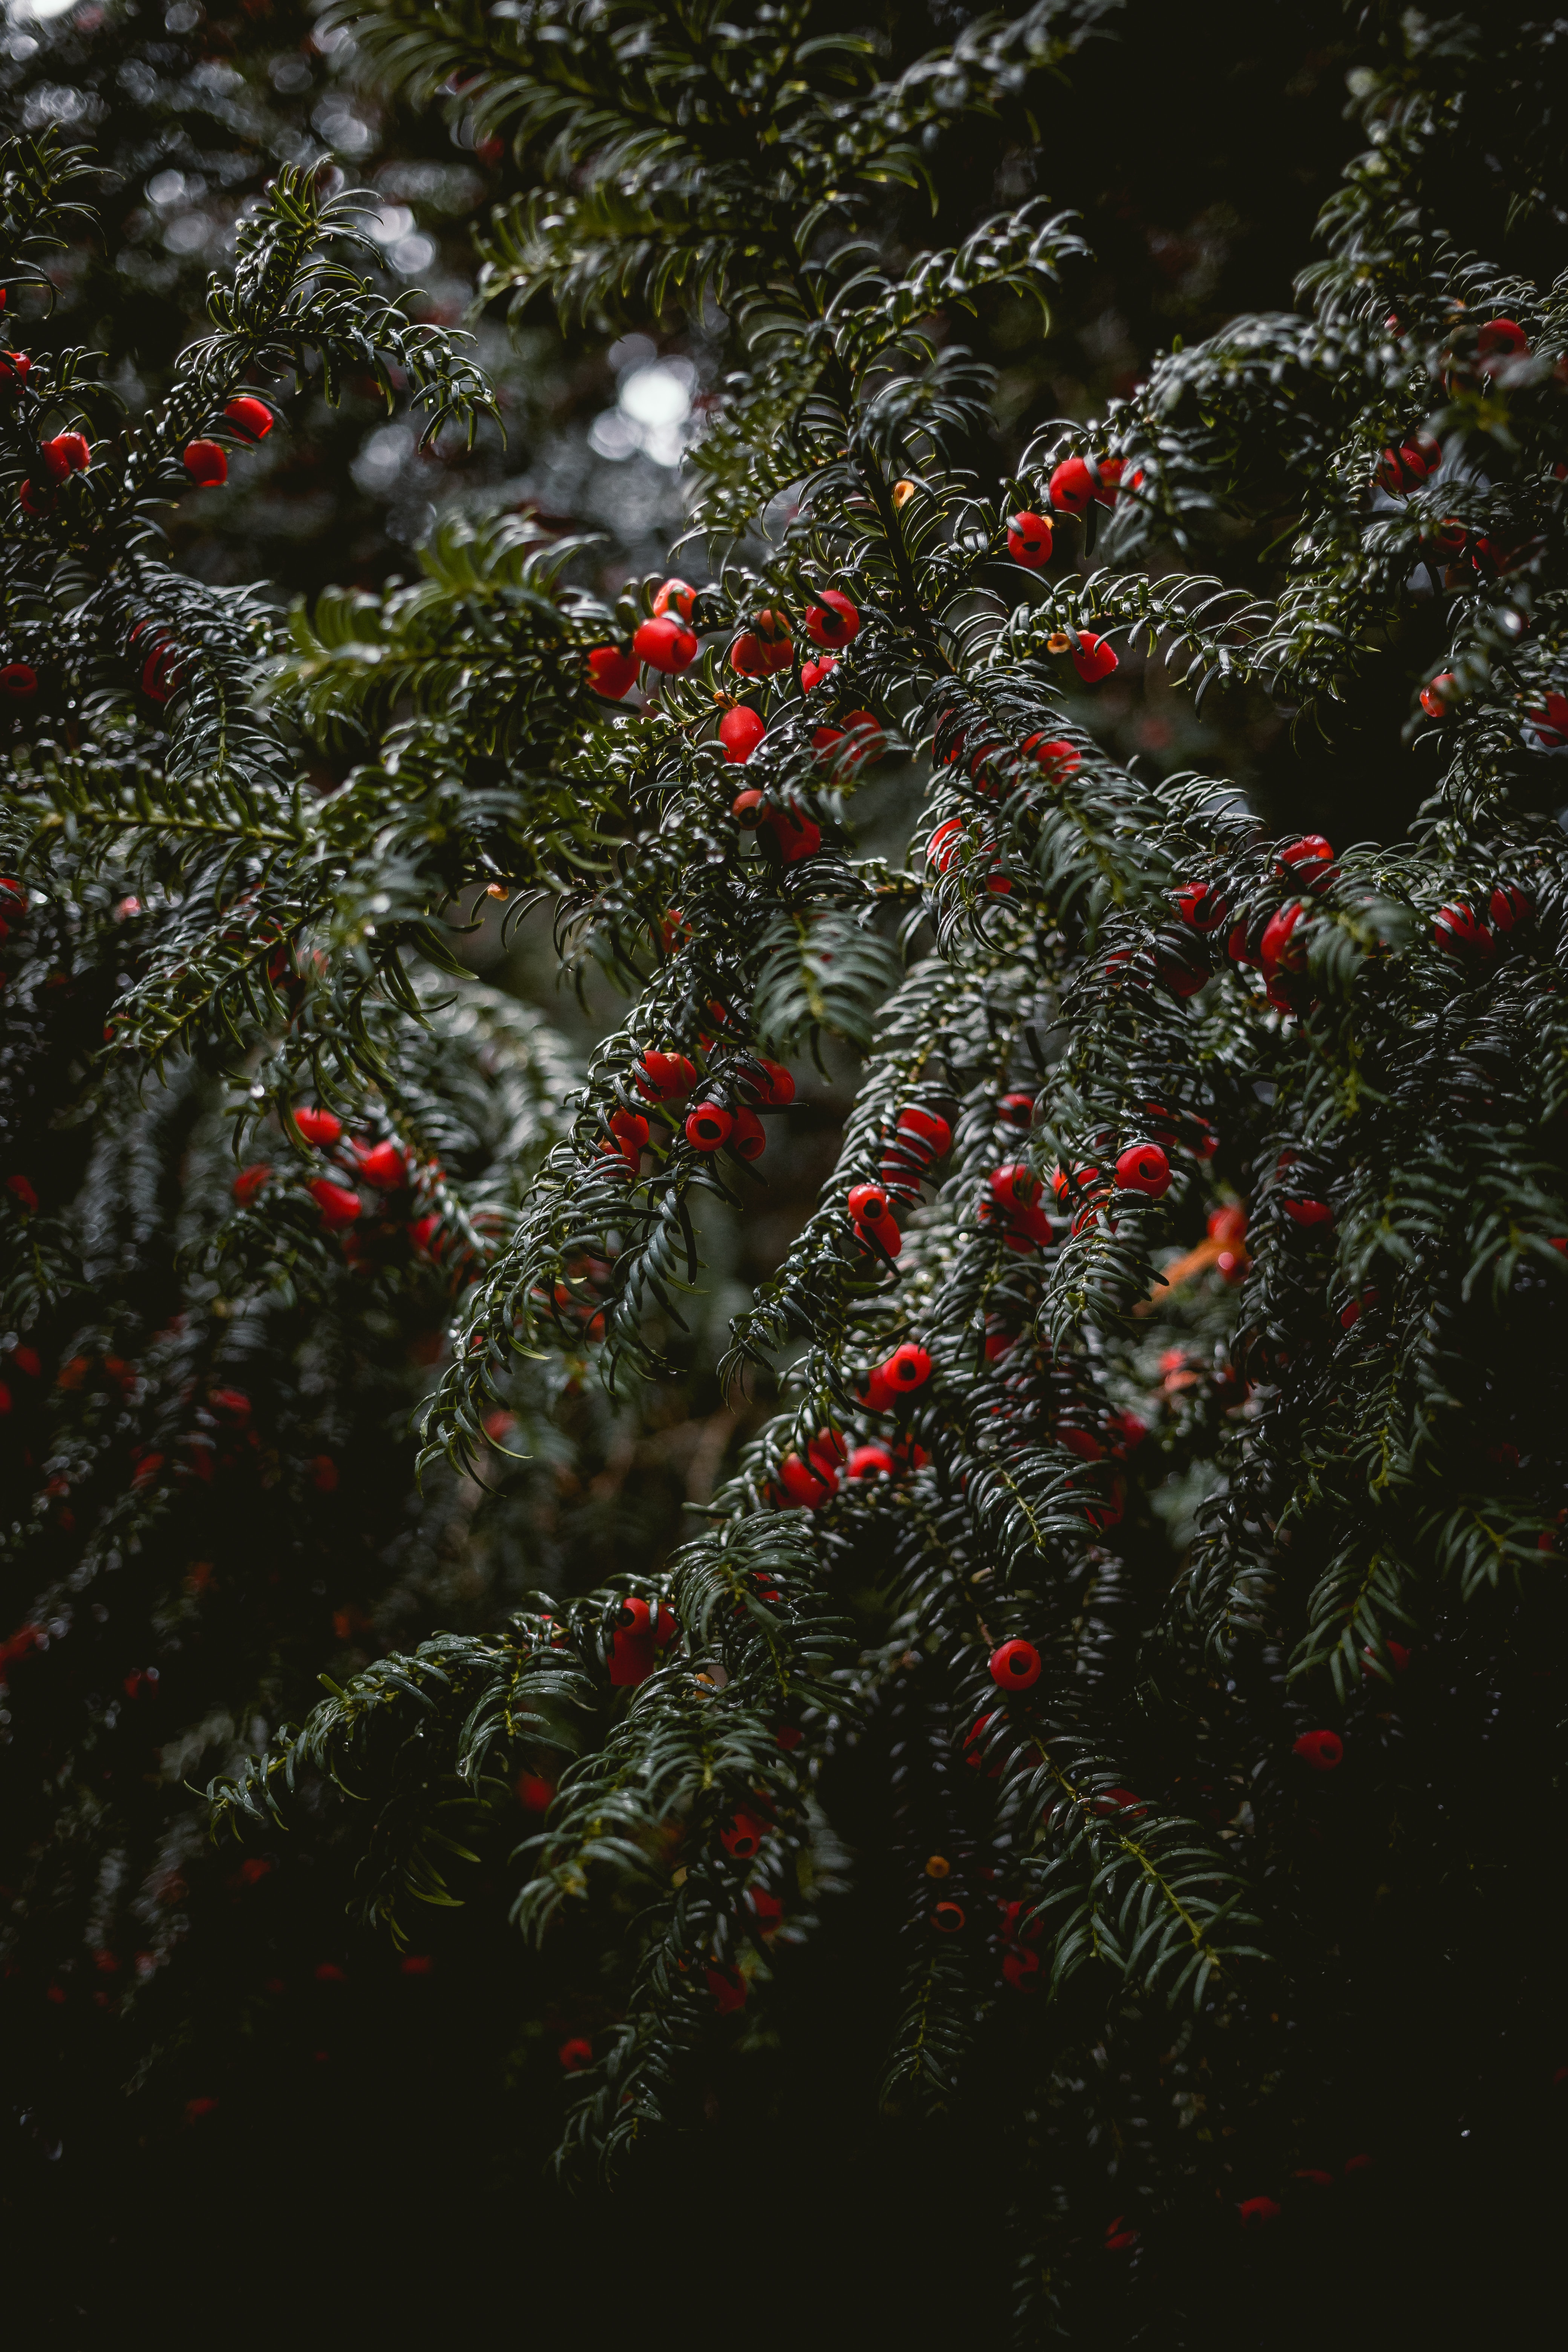 wet, plant, branches, red, nature, berries